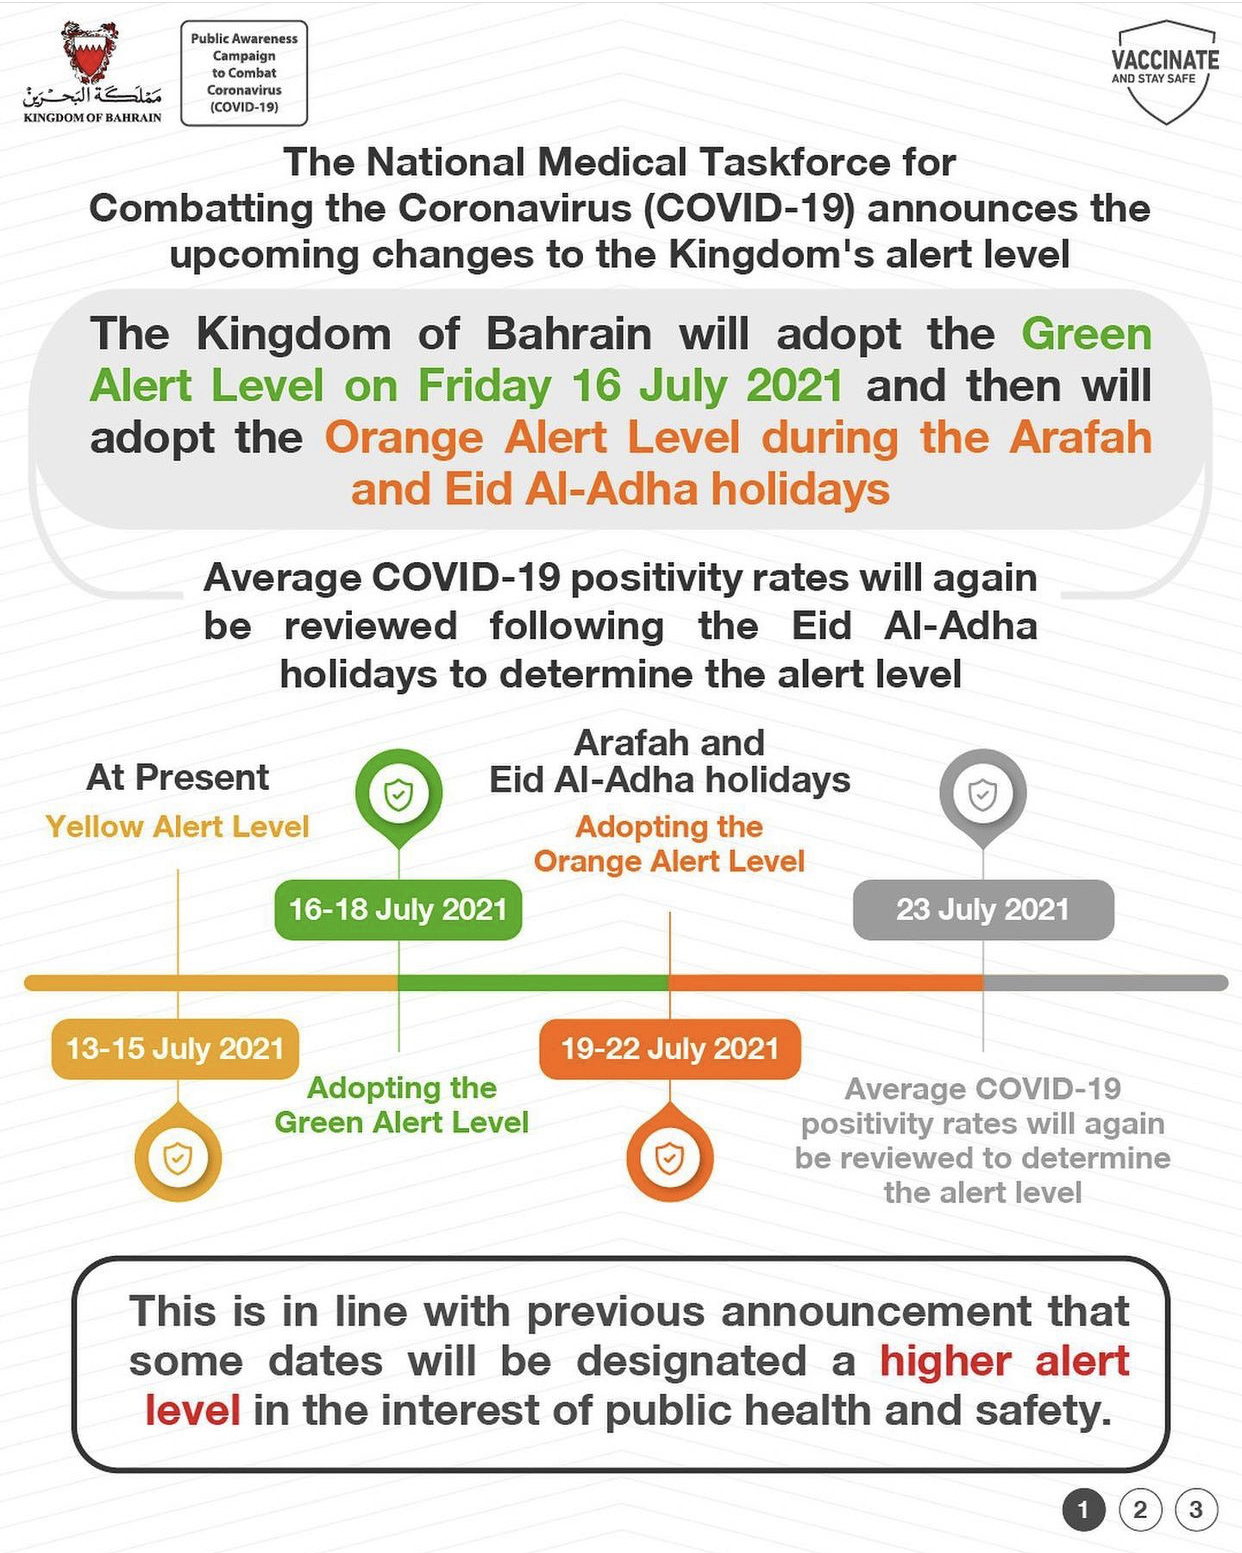 The National Medical Taskforce for Combatting the Coronavirus (COVID-19) announces the upcoming changes to the Kingdom's alert level